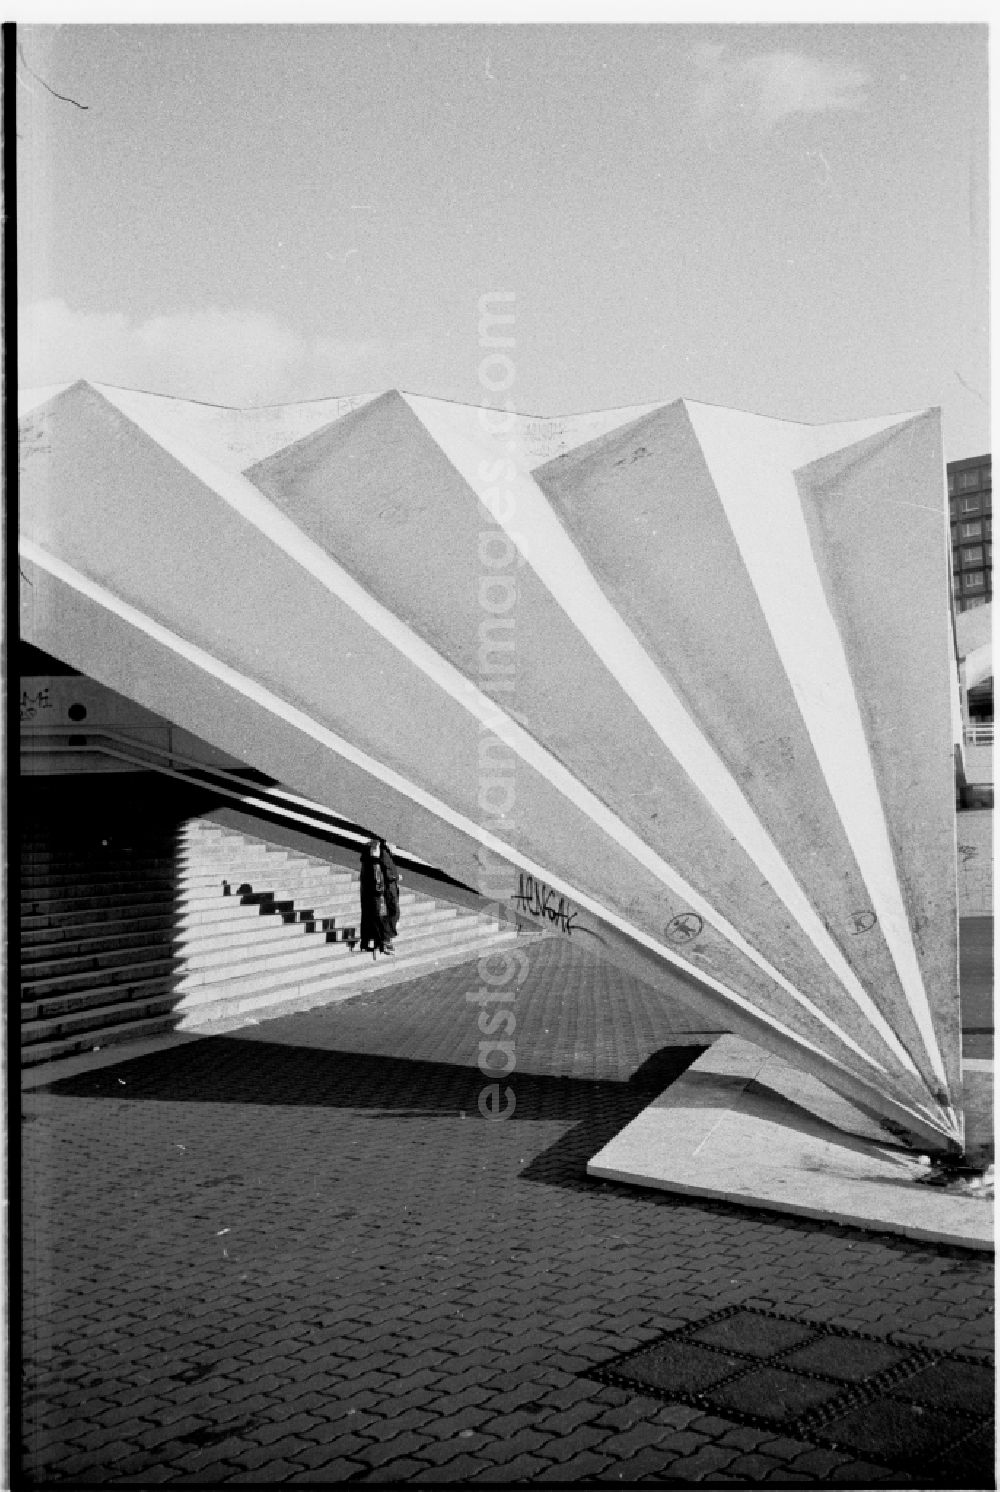 GDR image archive: Berlin - Architectural exterior design of the television tower fold at Alexanderplatz in East Berlin in the territory of the former GDR, German Democratic Republic